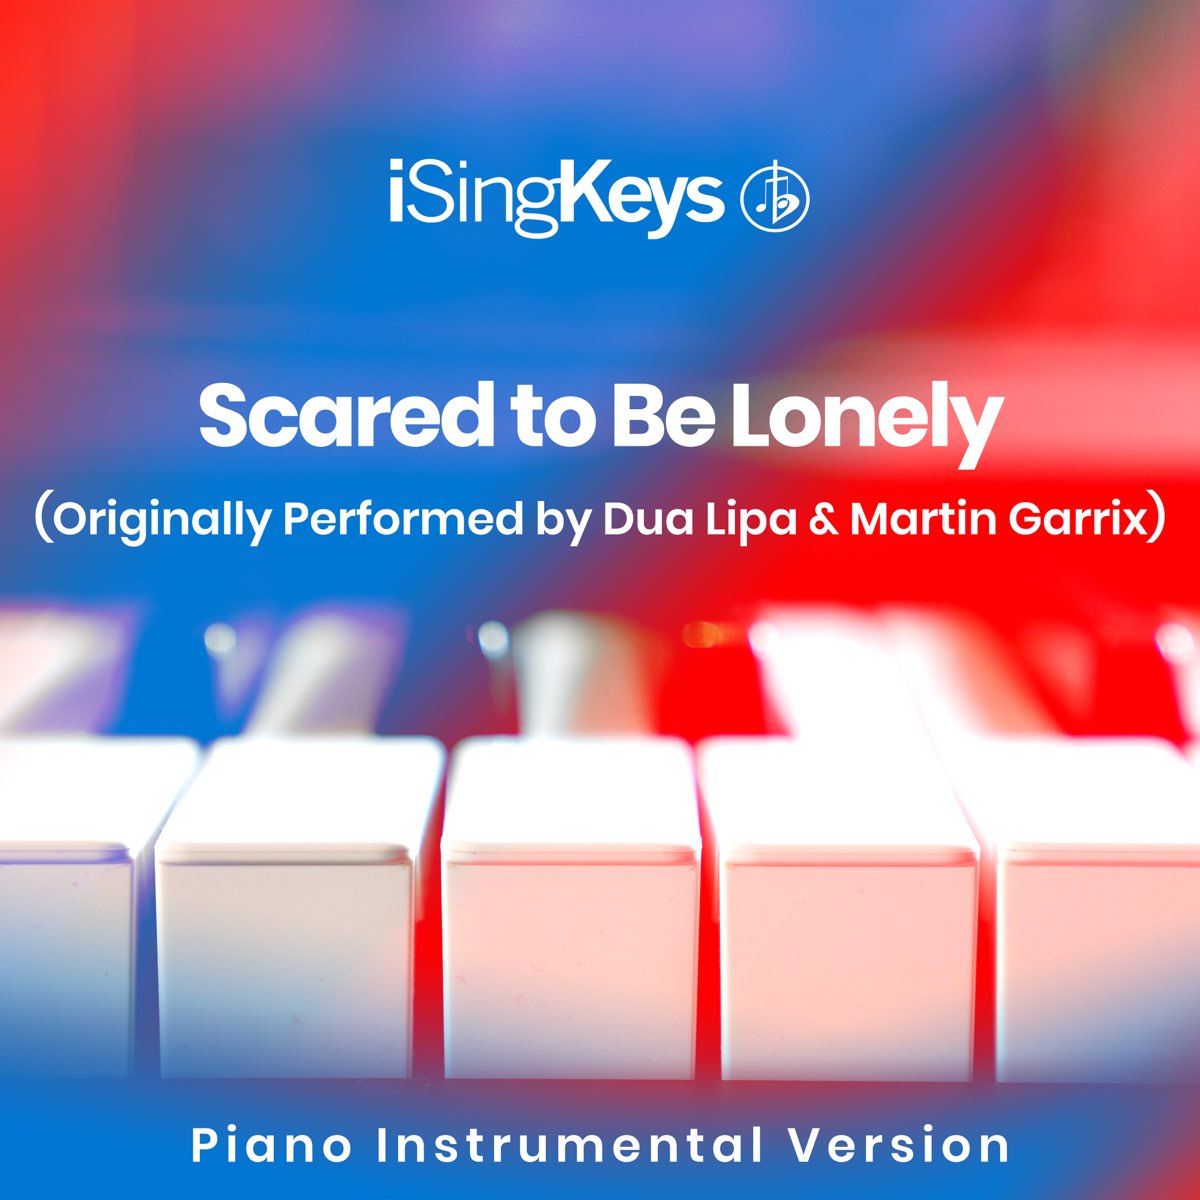 Scared to Be Lonely (Originally Performed by Martin Garrix and Dua Lipa)  [Piano Instrumental Version] - Single par iSingKeys sur Apple Music